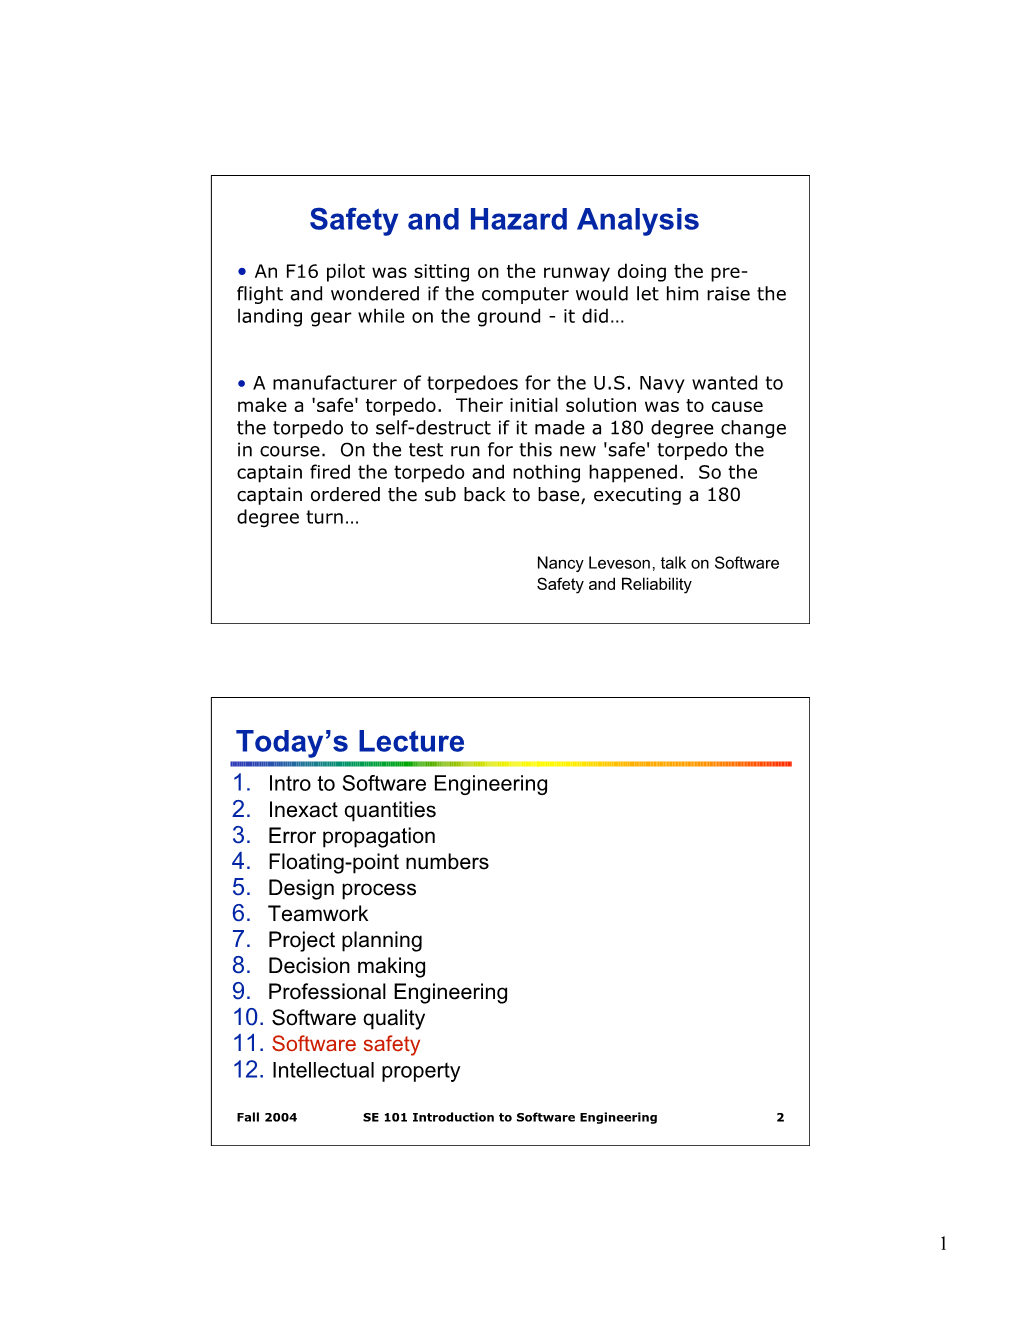 Safety and Hazard Analysis Today's Lecture